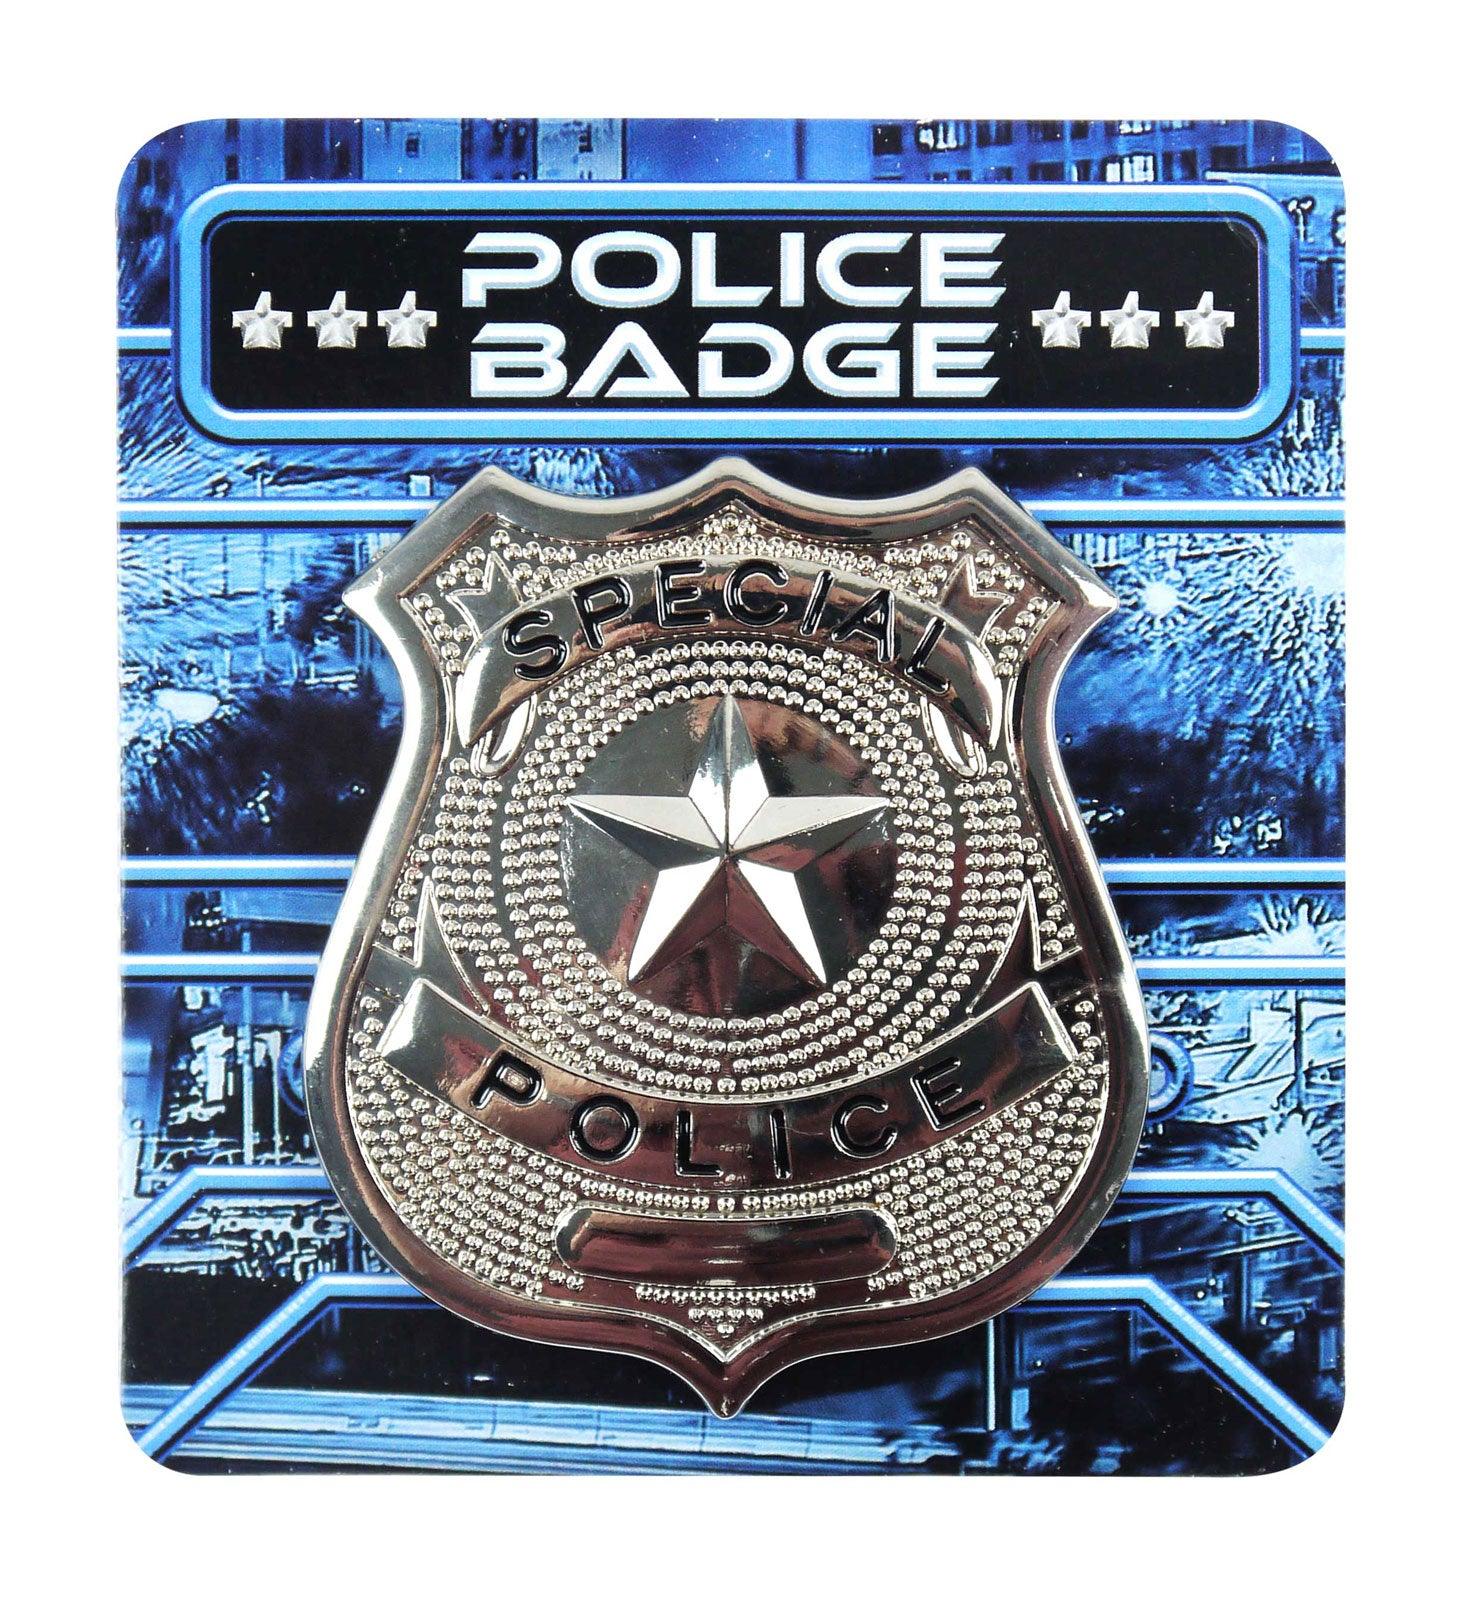 Silver Metal Police Badge Unisex Adults Police costume Fancy Dress Accessory - Labreeze